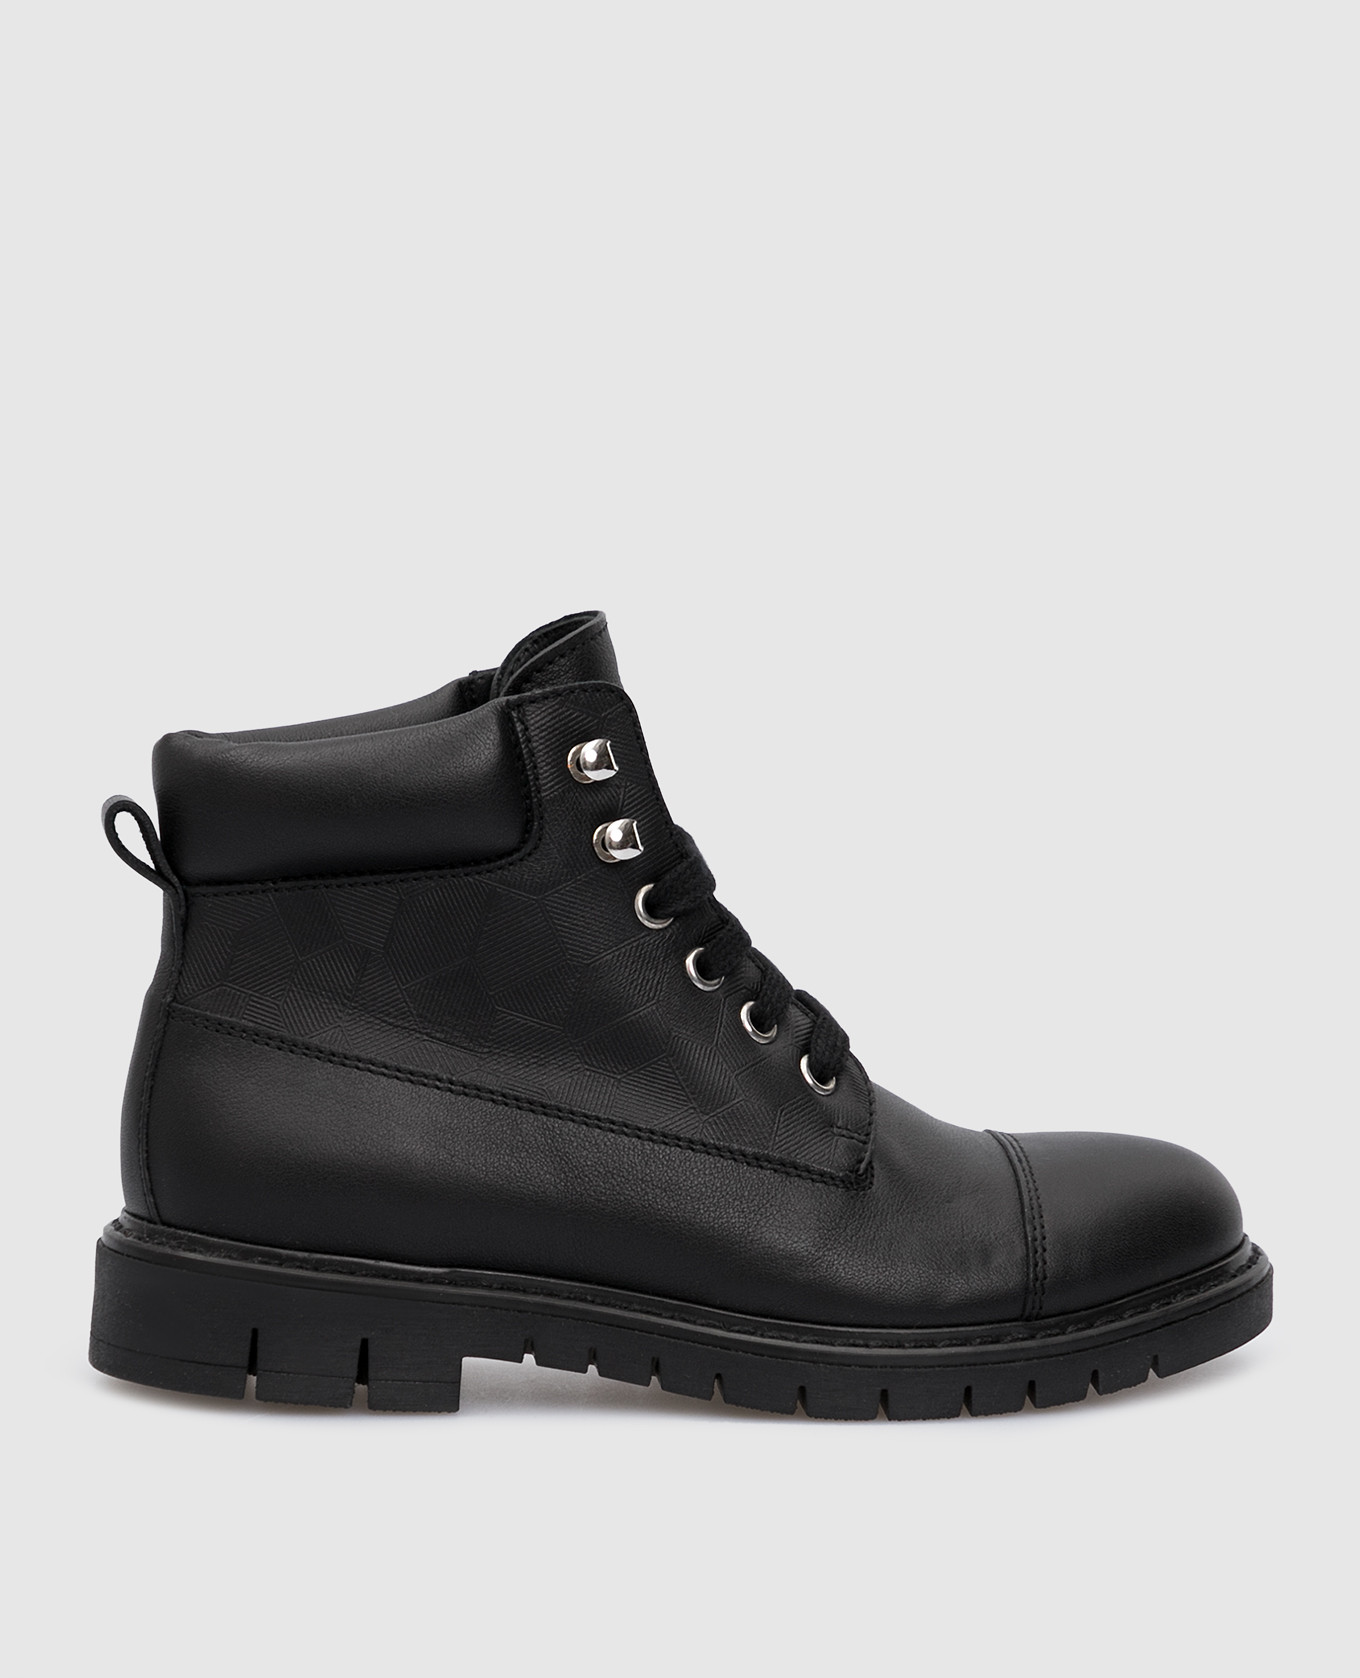 Children's black leather boots